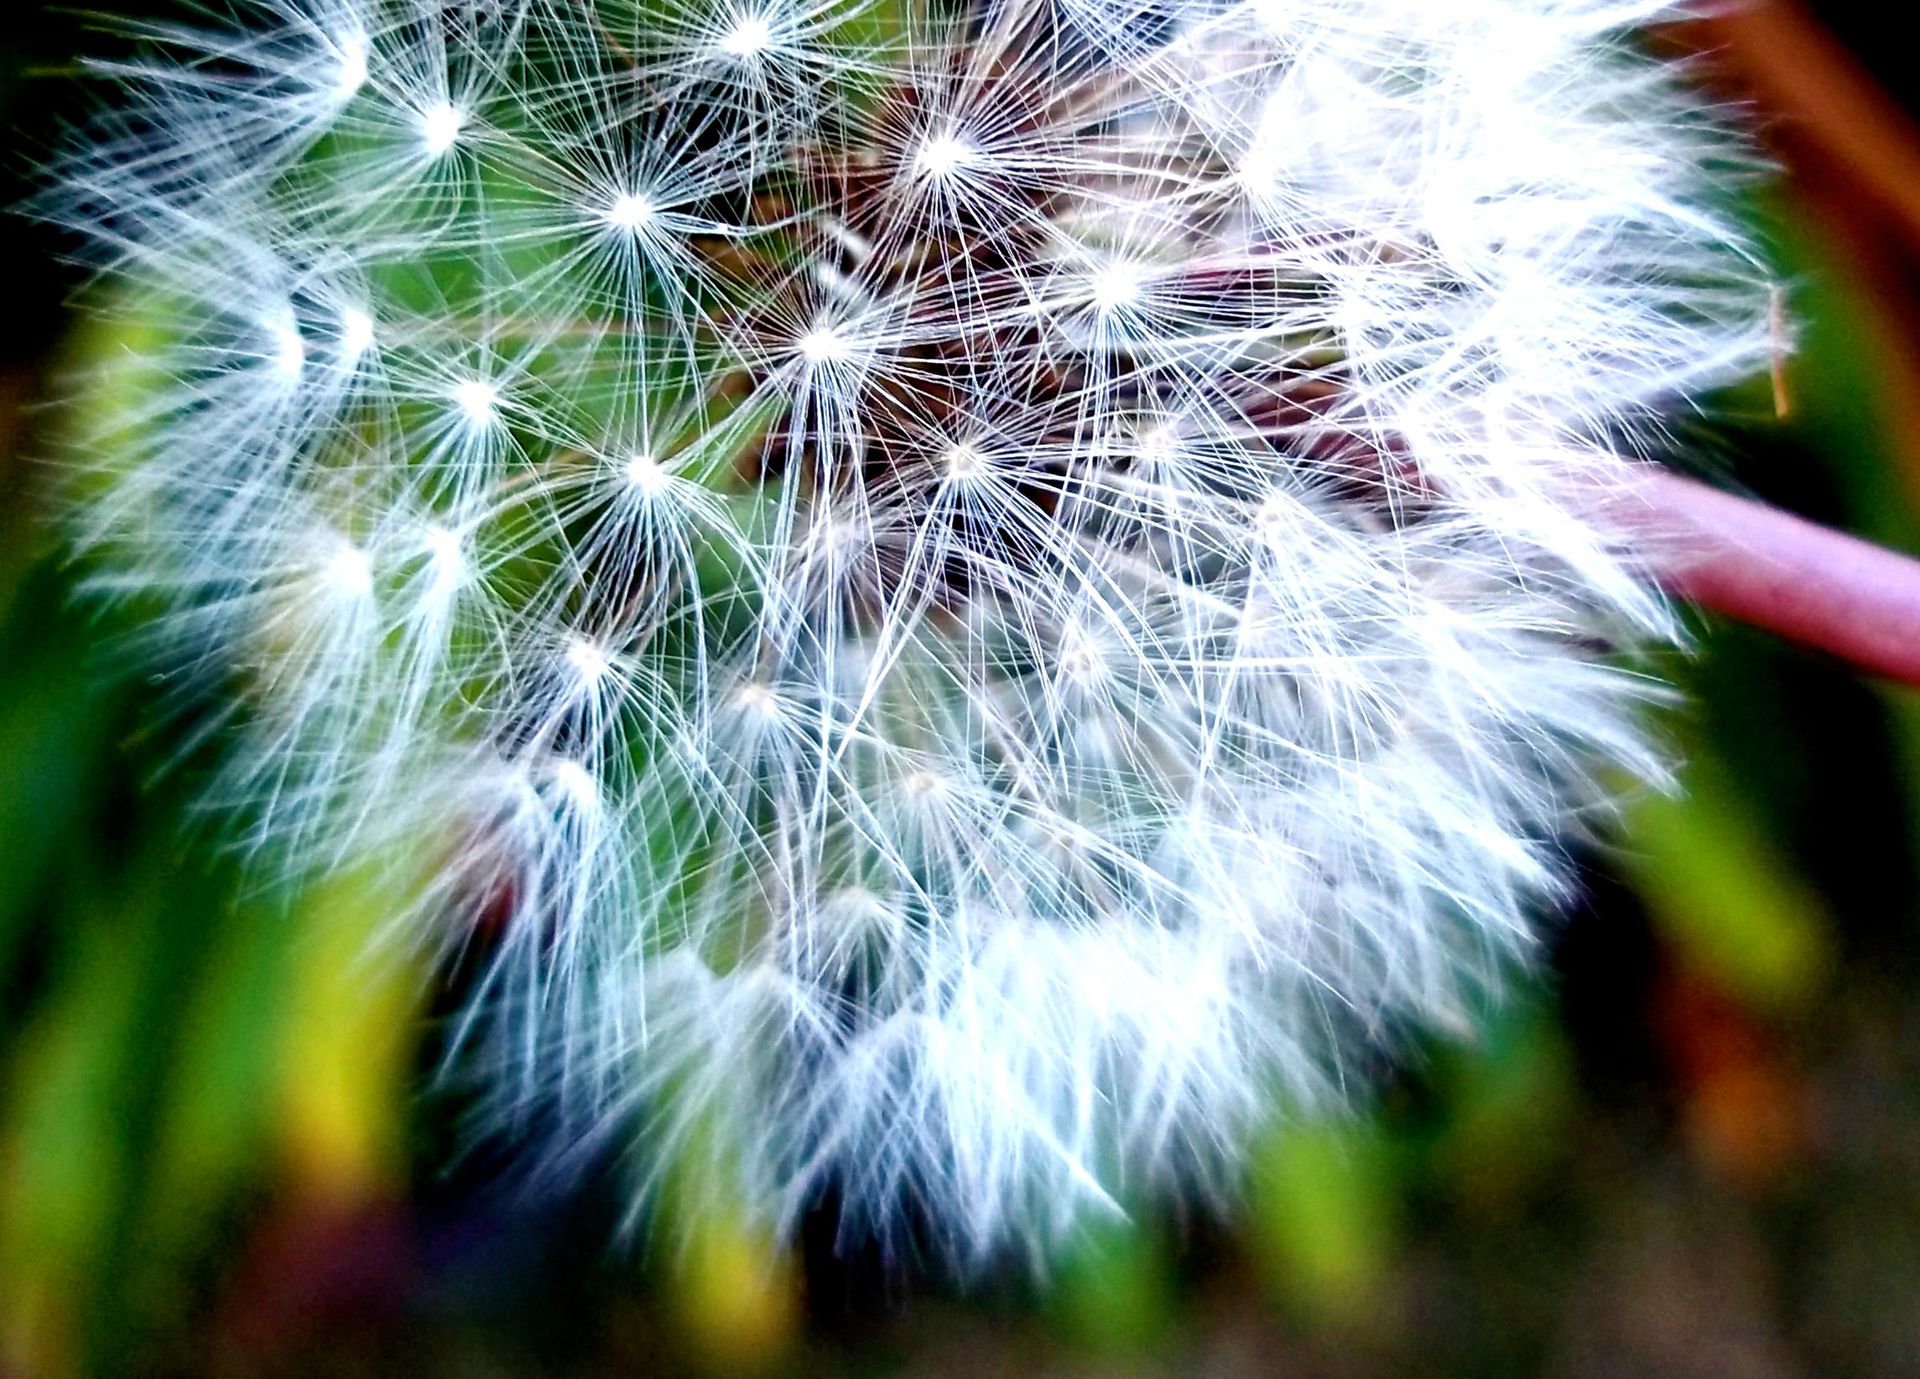 A dandelion with many white seeds.  